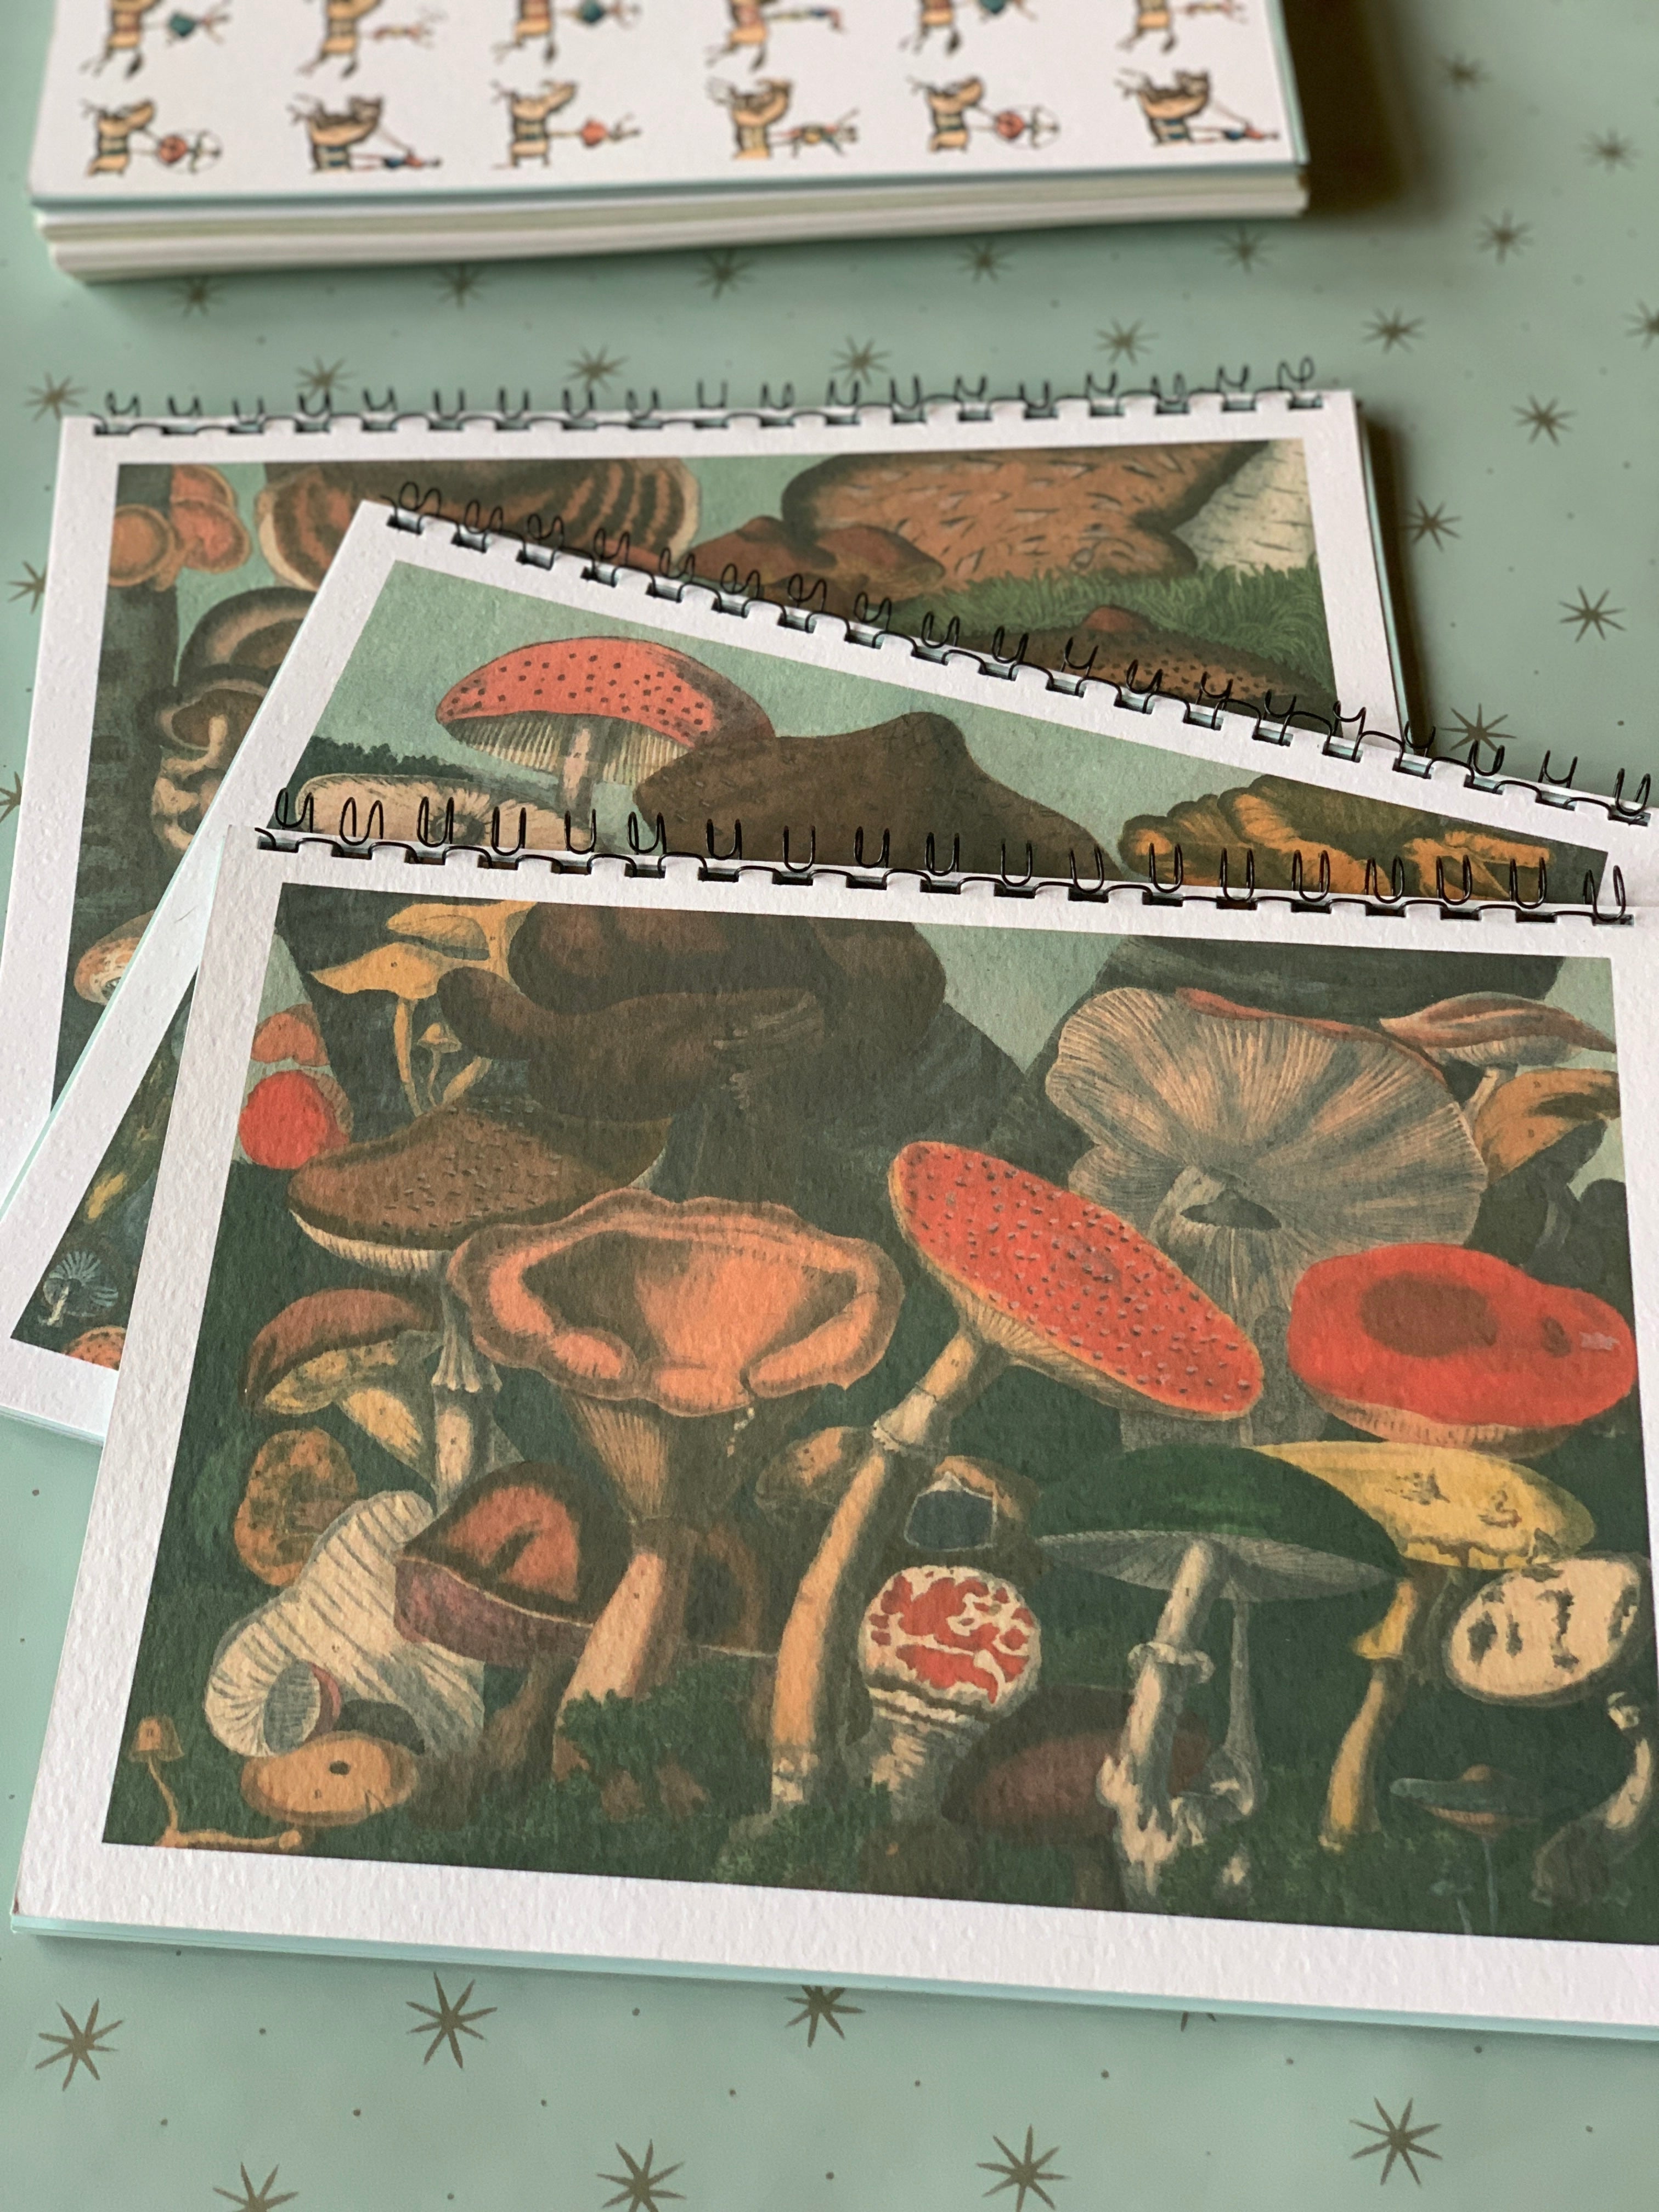 ‘We are the Champignions’ Mushroom Foraging Notebook